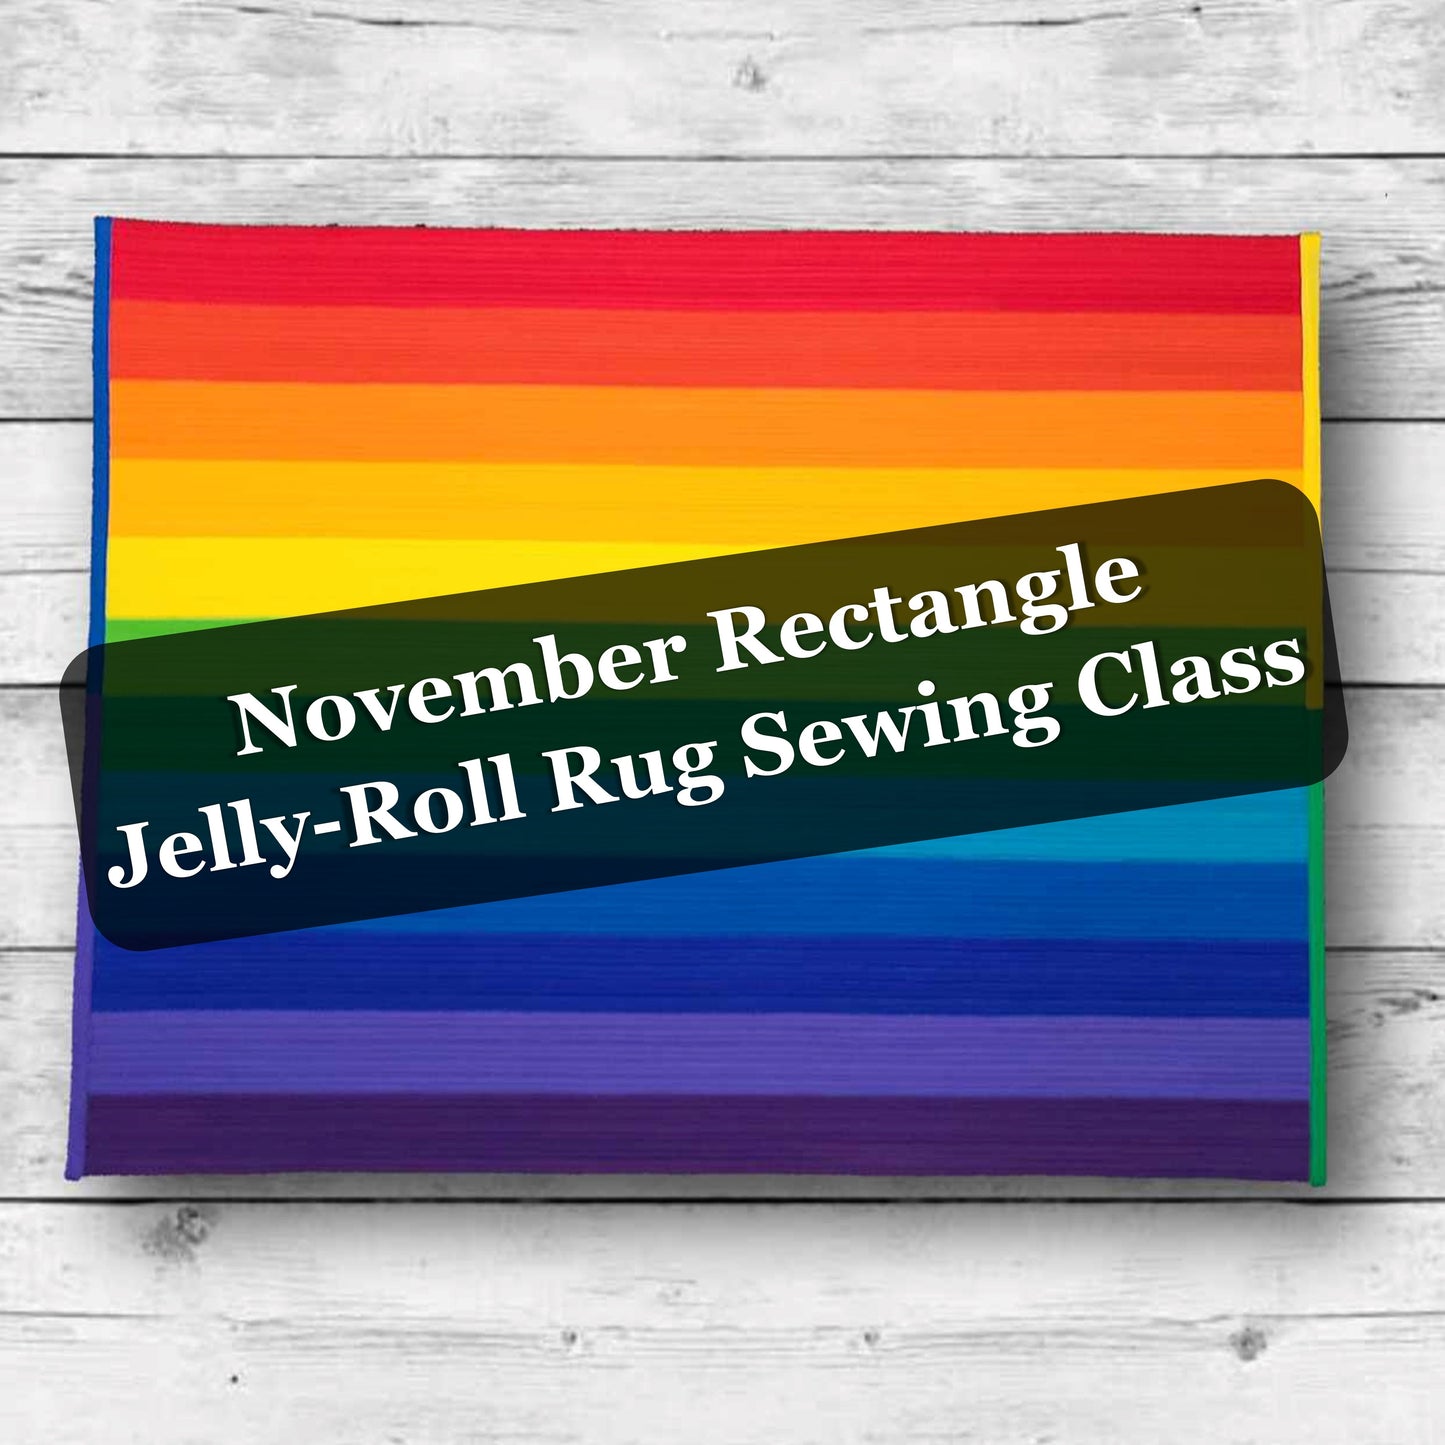 November Rectangle Jelly-Roll Rug Sewing Class